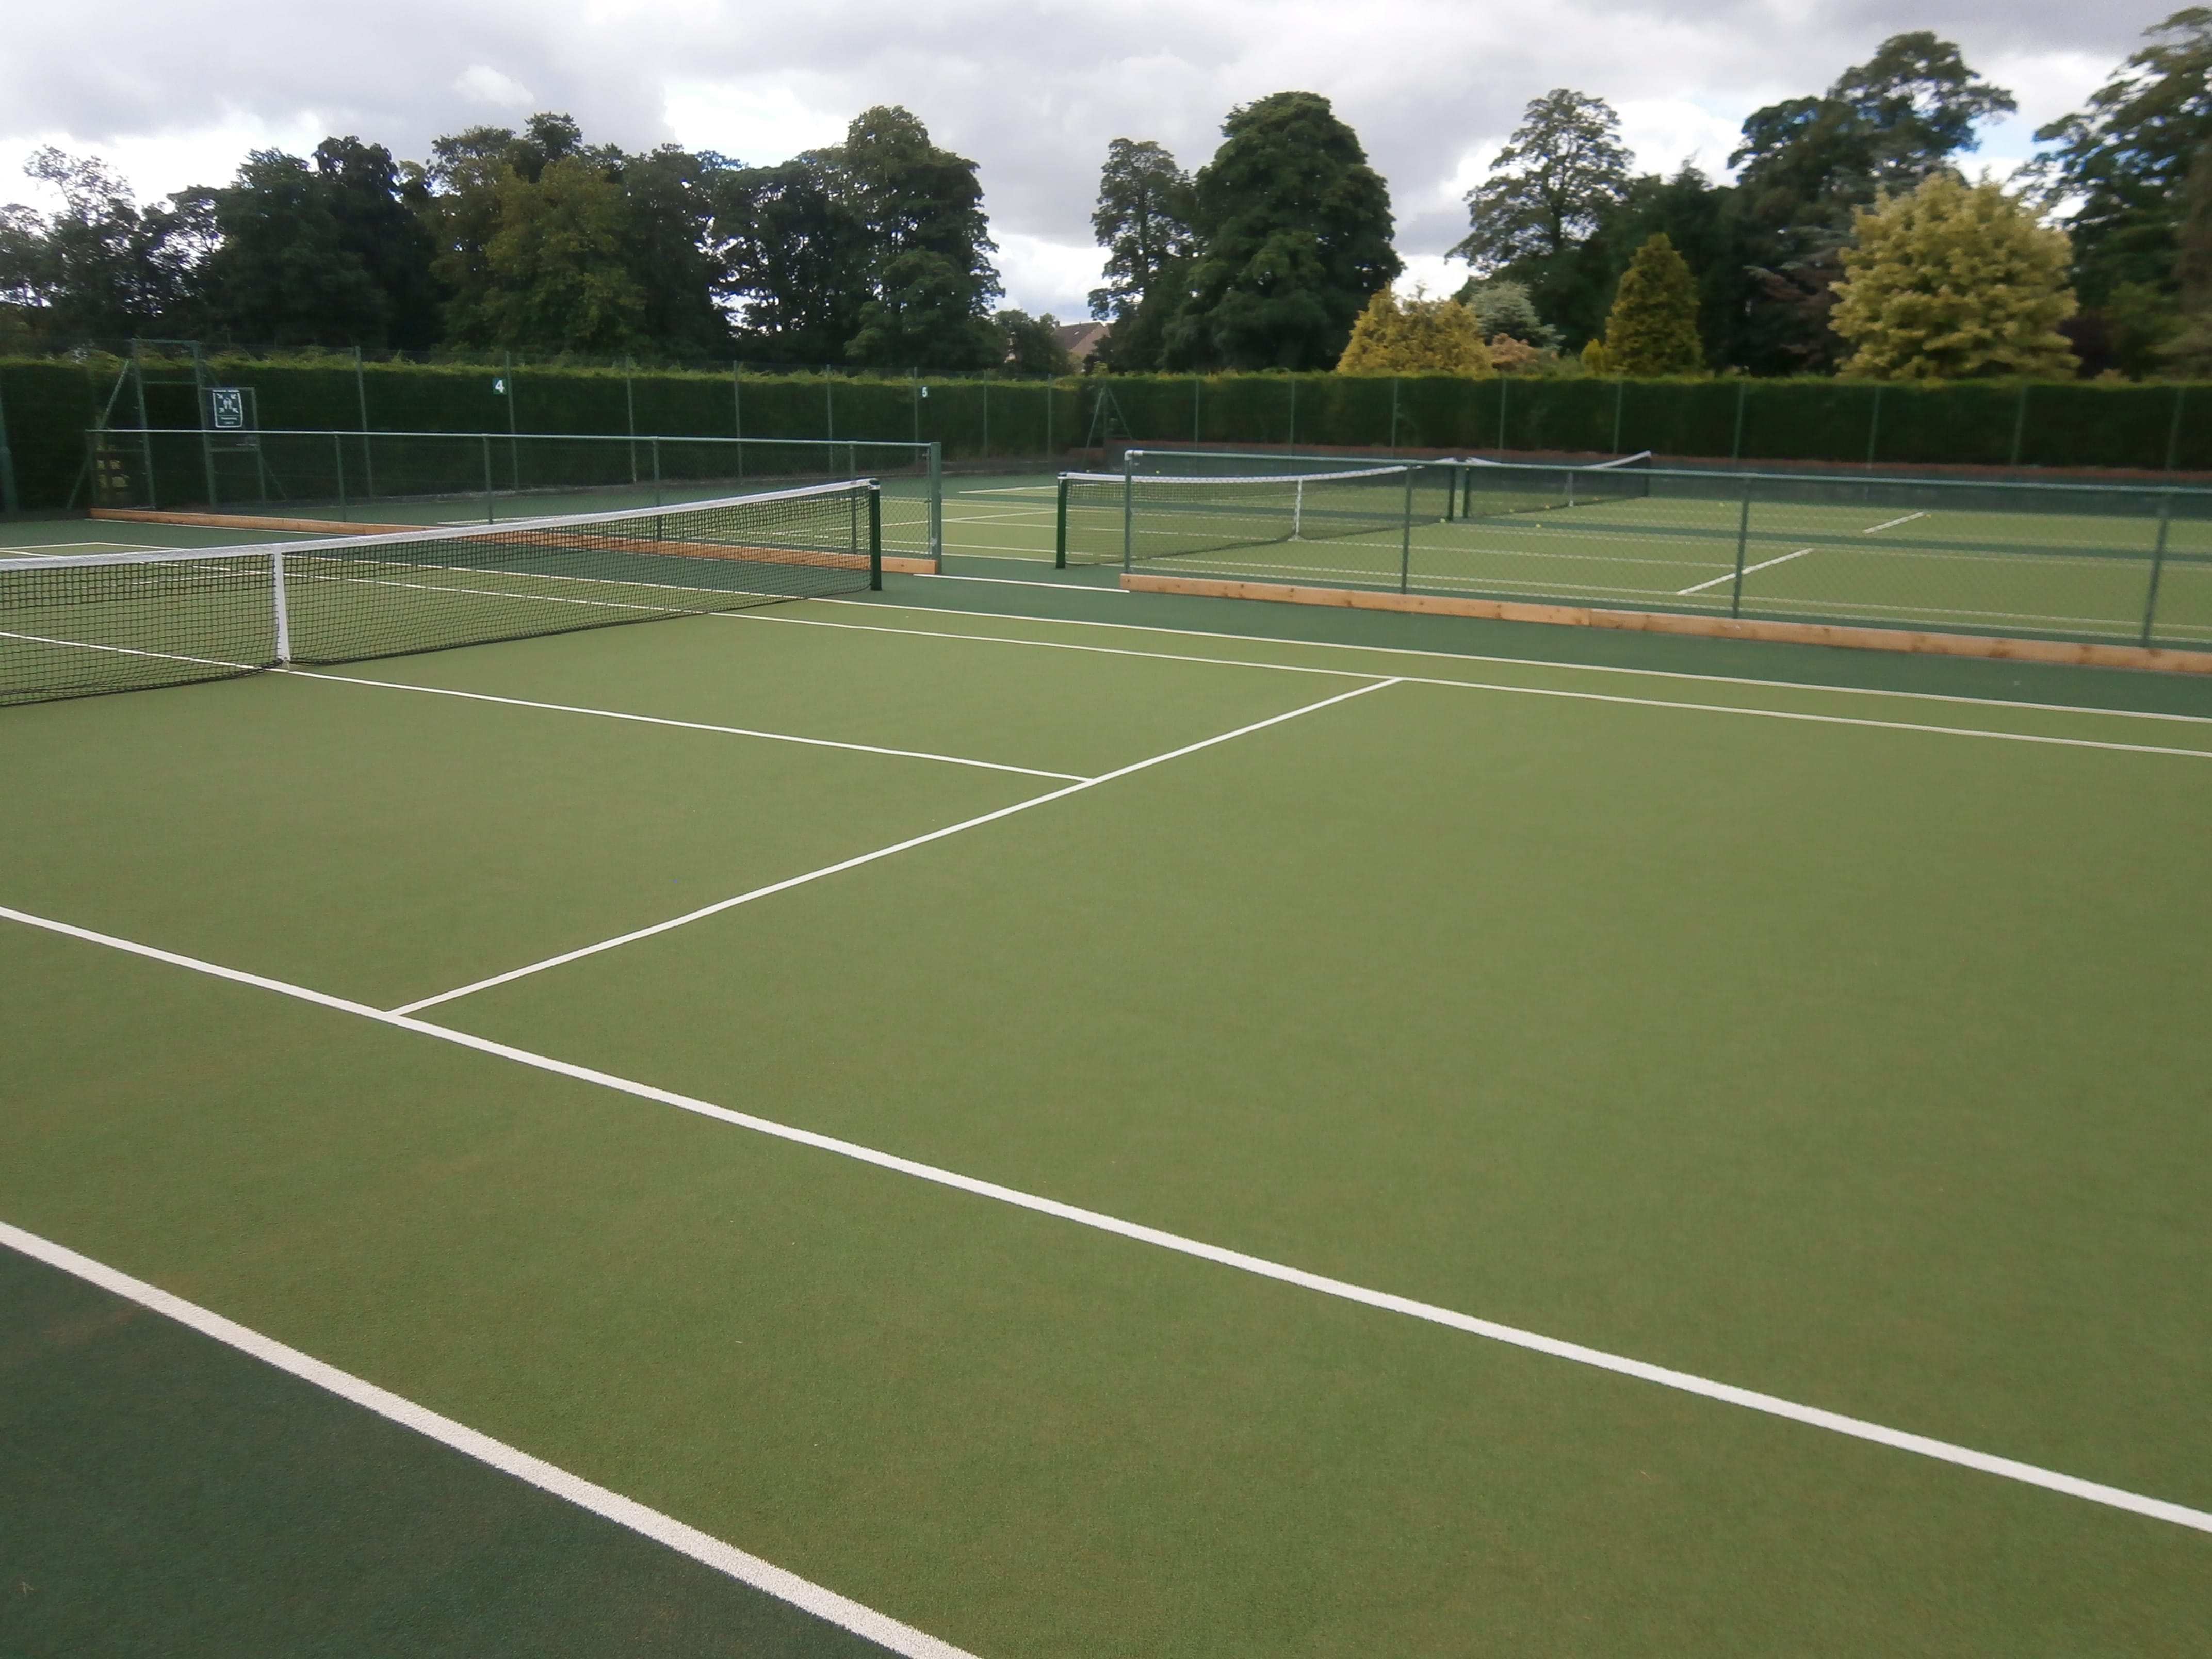 junior tennis courts with divider fencing and netting